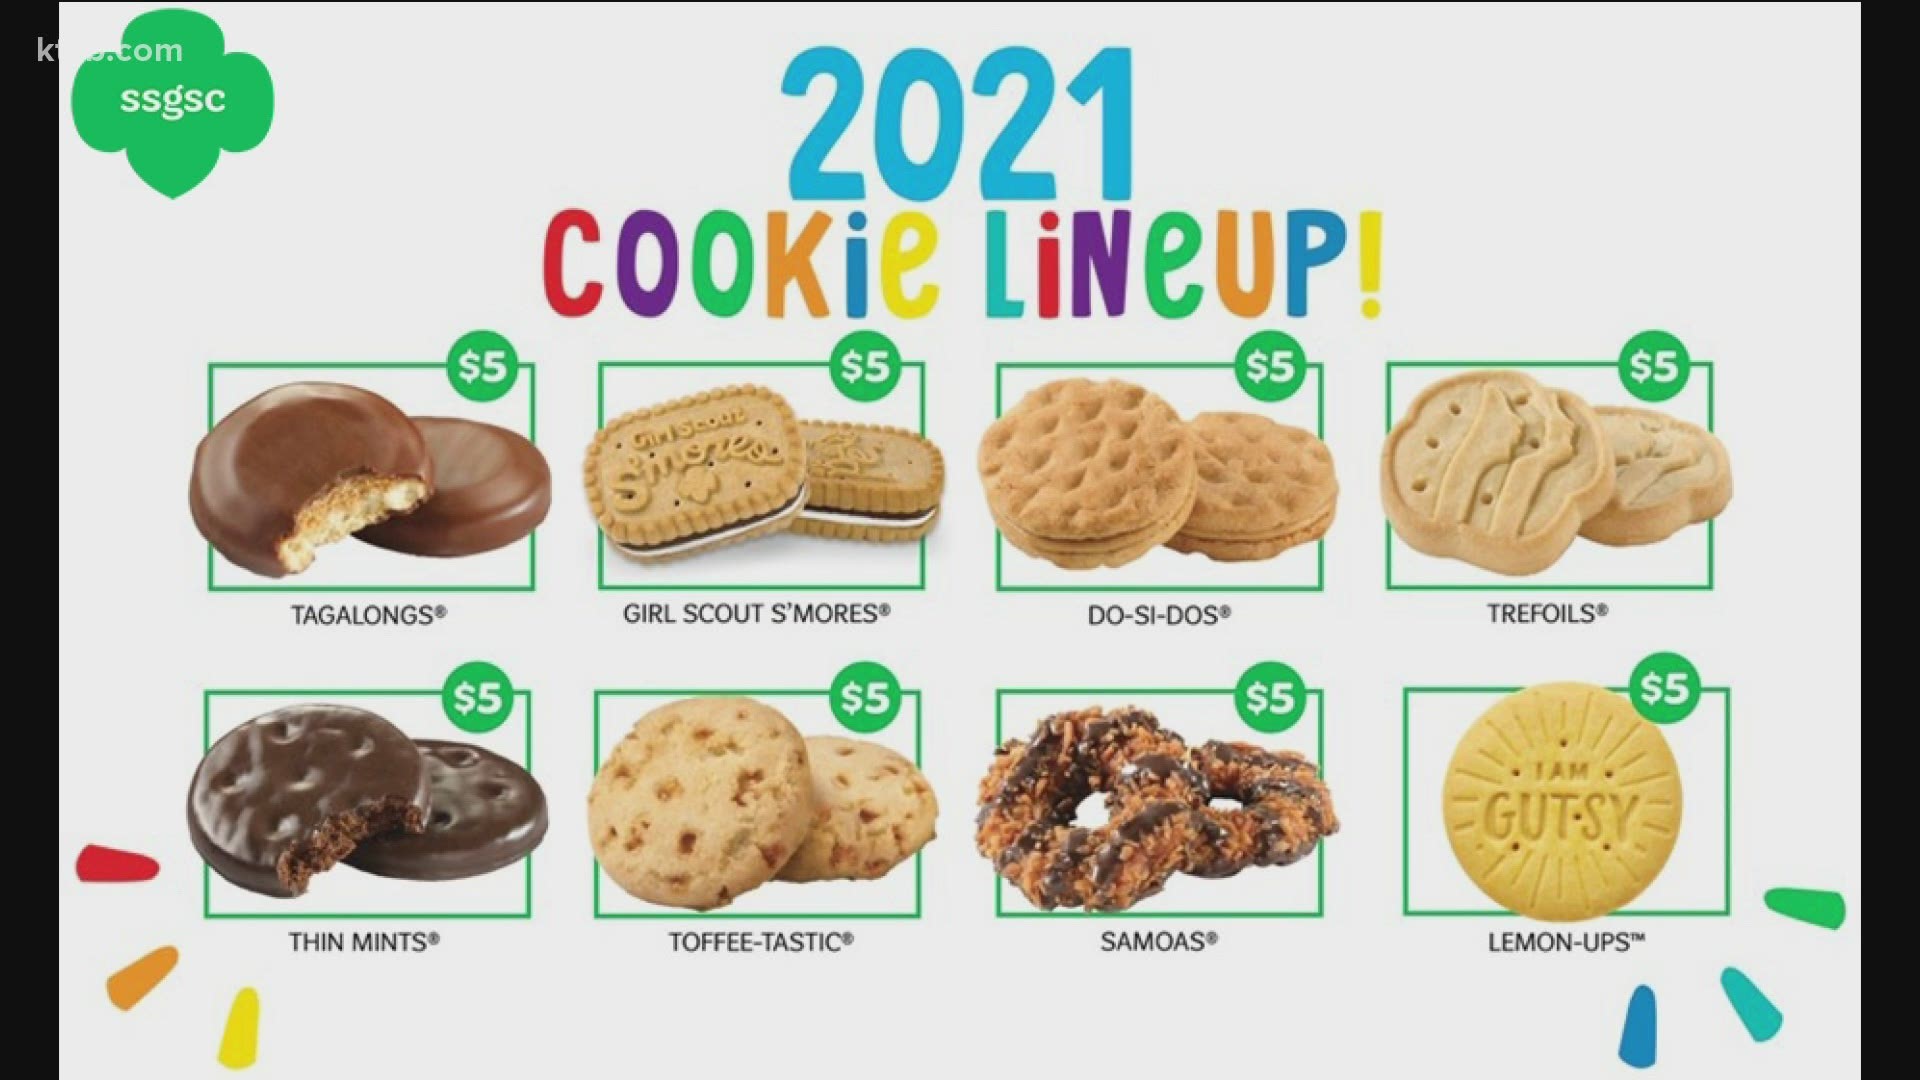 For the first time, cookie lovers will be able to order Girl Scout cookies before the new year.